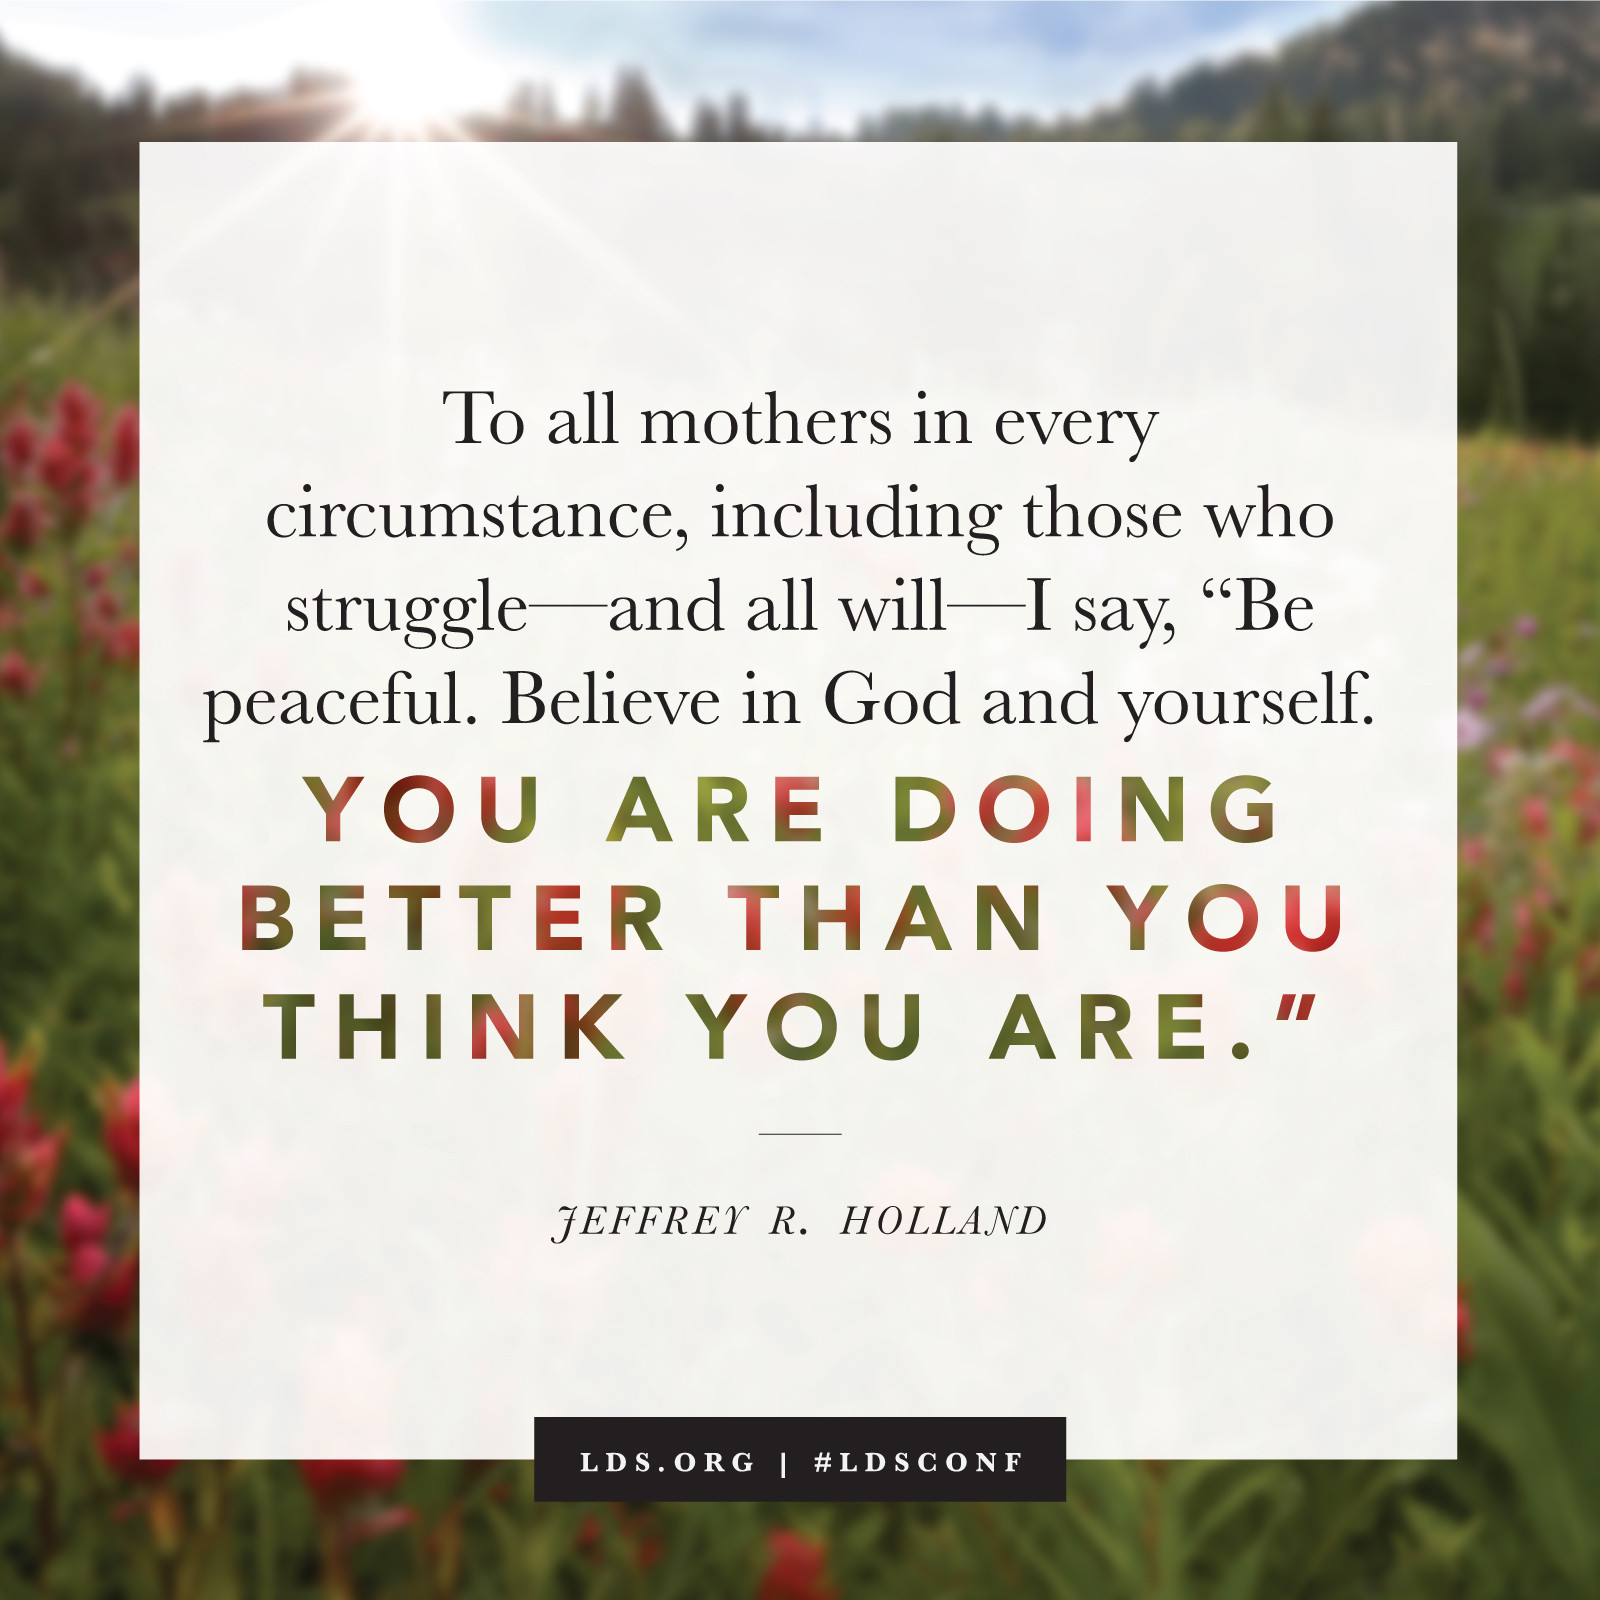 Lds Quotes About Mothers
 You Are Doing Better Than You Think